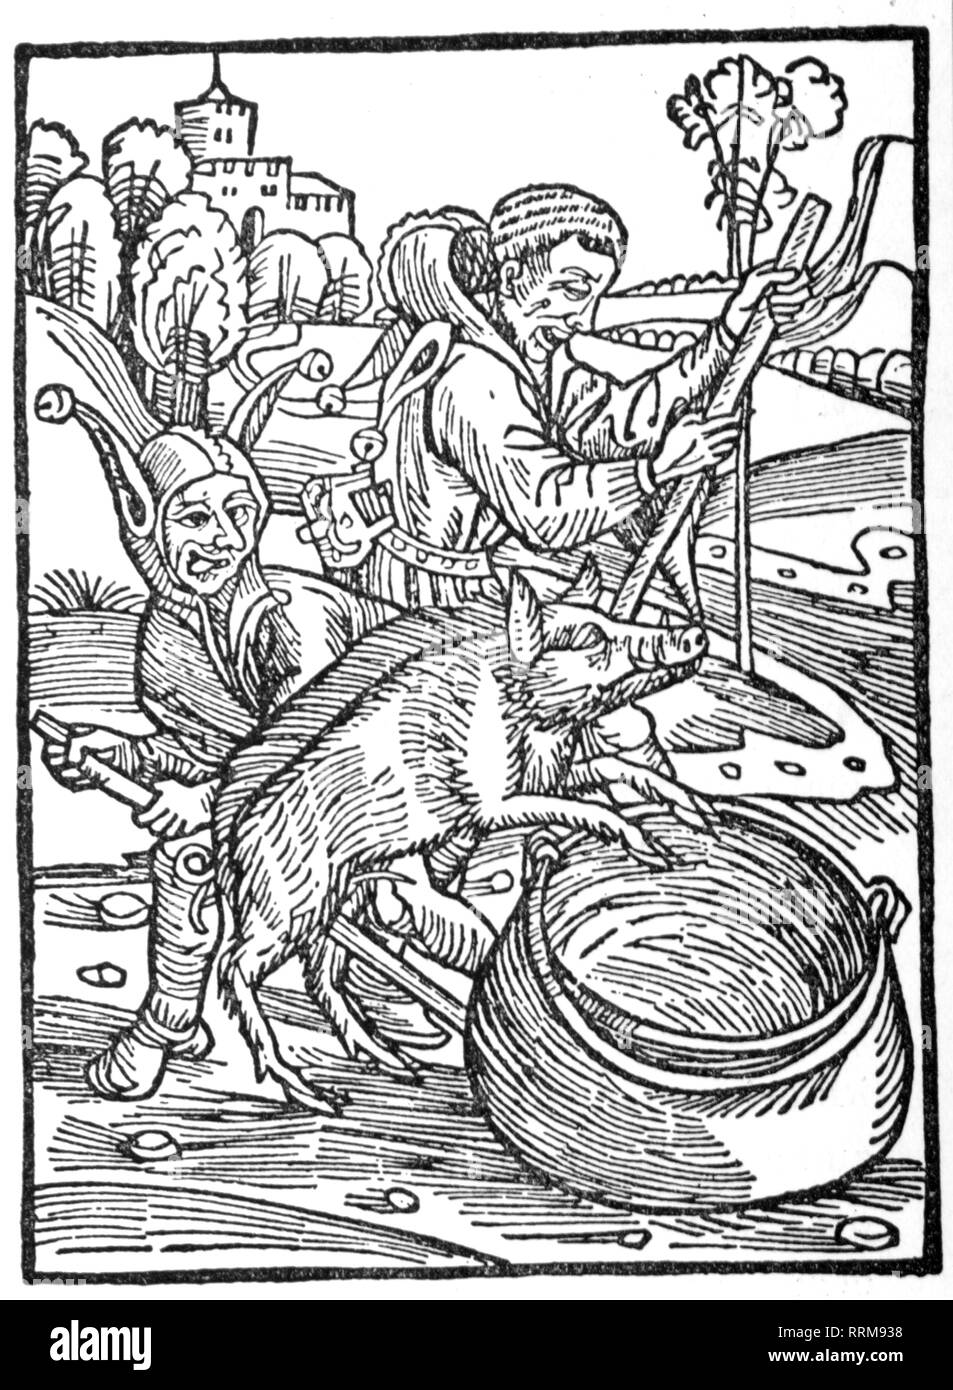 Brant, Sebastian, 1457/1458 - 10.5.1521, German humanist and author / writer, works, 'The Ship of Fools', printed by Johann Bergmann von Olpe, Basel, 1494, woodcut to the 2nd chapter, 'Of good Councillors', Additional-Rights-Clearance-Info-Not-Available Stock Photo